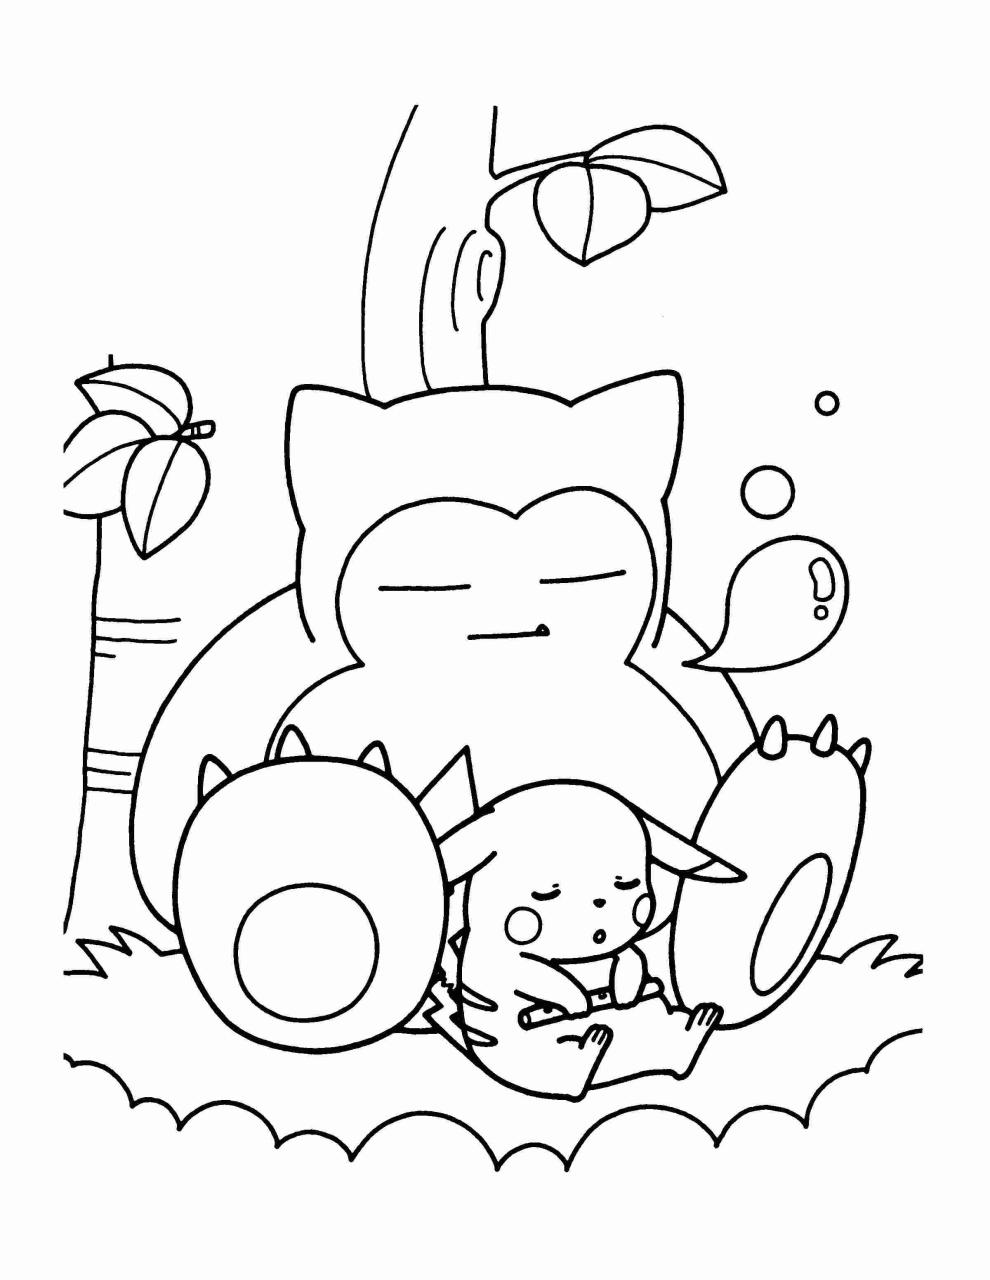 Coloring Pages Pokemon snorlax coloring pages New 55++ Printable